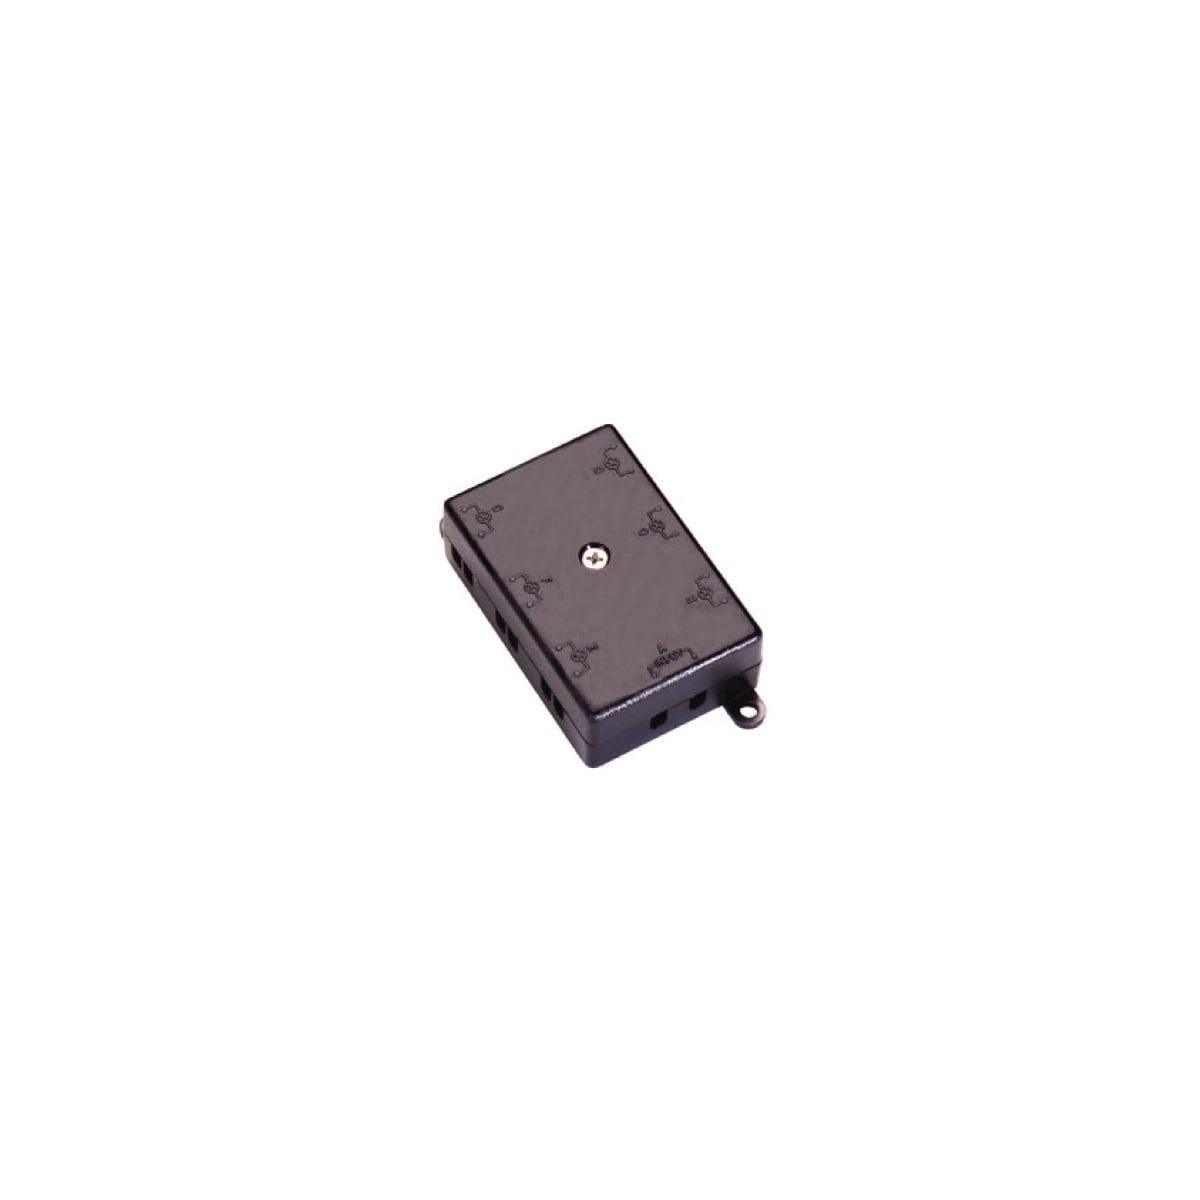 at straffe grund Zoologisk have WAC Lighting MTB-01 6 Output Wiring Terminal Block for | Build.com